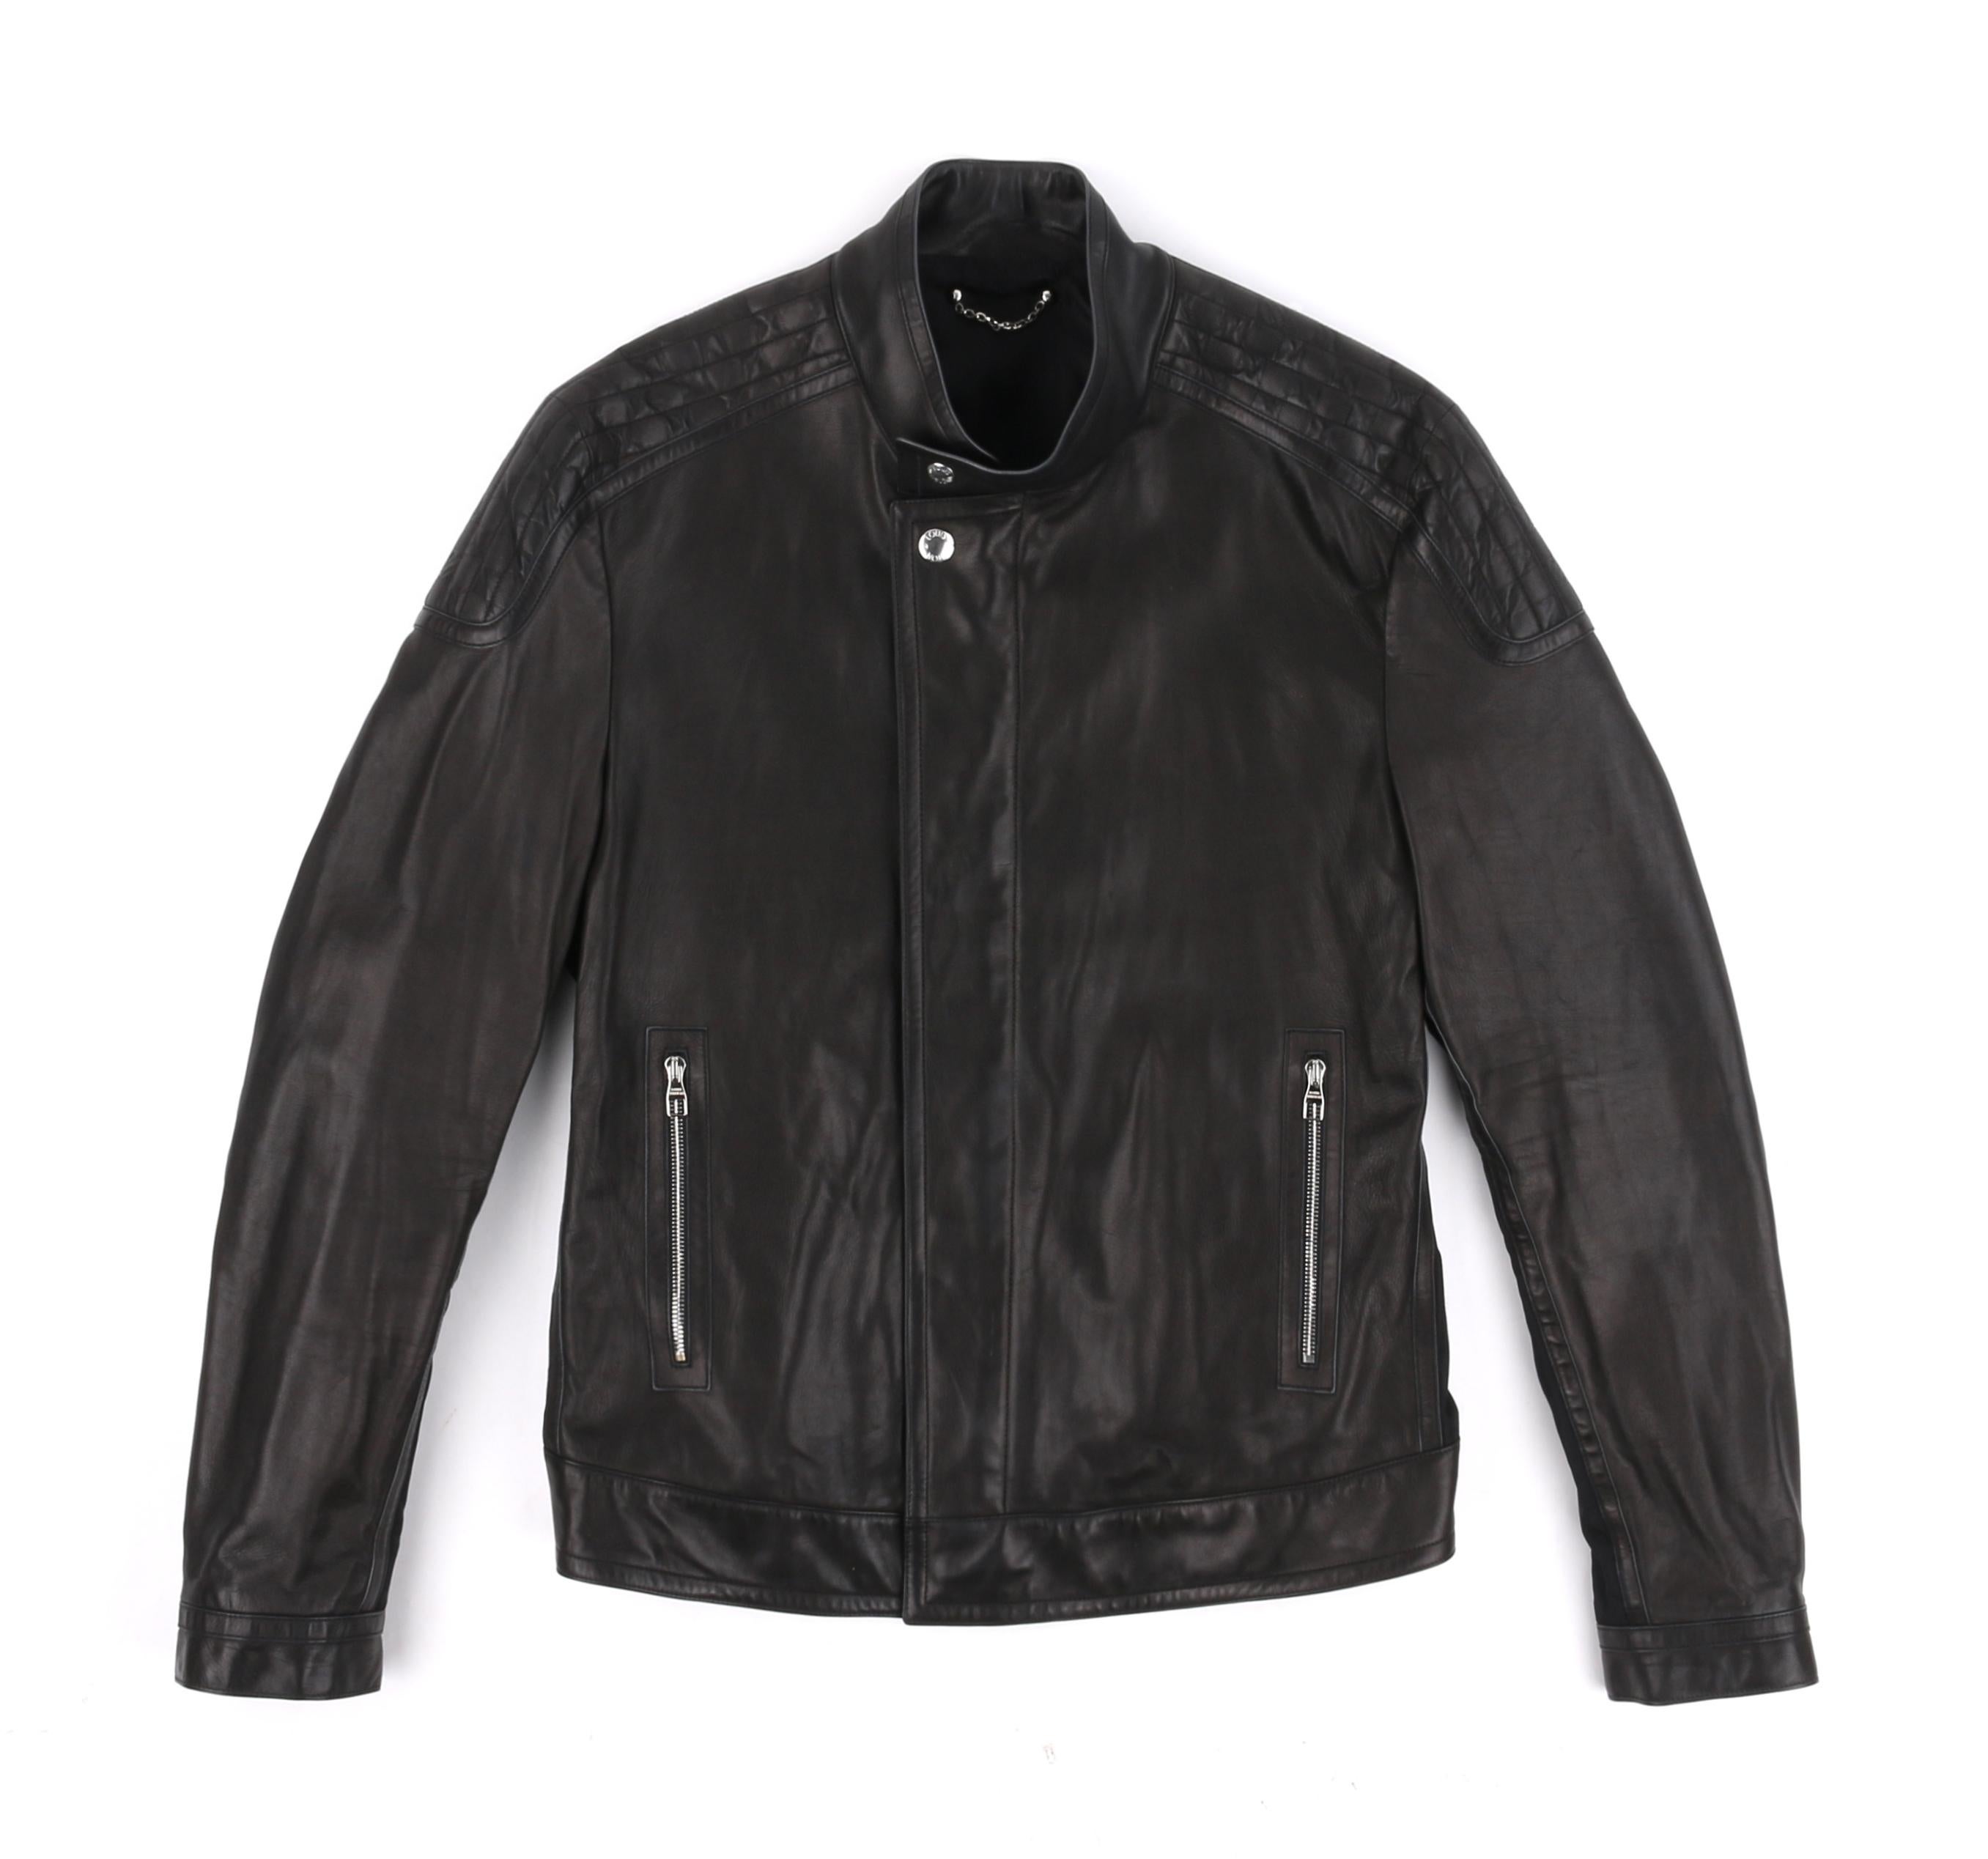 LOUIS VUITTON c.2011 Black Damier Quilted Leather Moto Biker Jacket
 
Brand / Manufacturer: Louis Vuitton
Style: Moto Jacket
Color(s): Black 
Lined: Yes      
Marked Fabric Content: Exterior: 60% Calfskin; 10% Polyamide. Lining: 90% Cupro; 10%